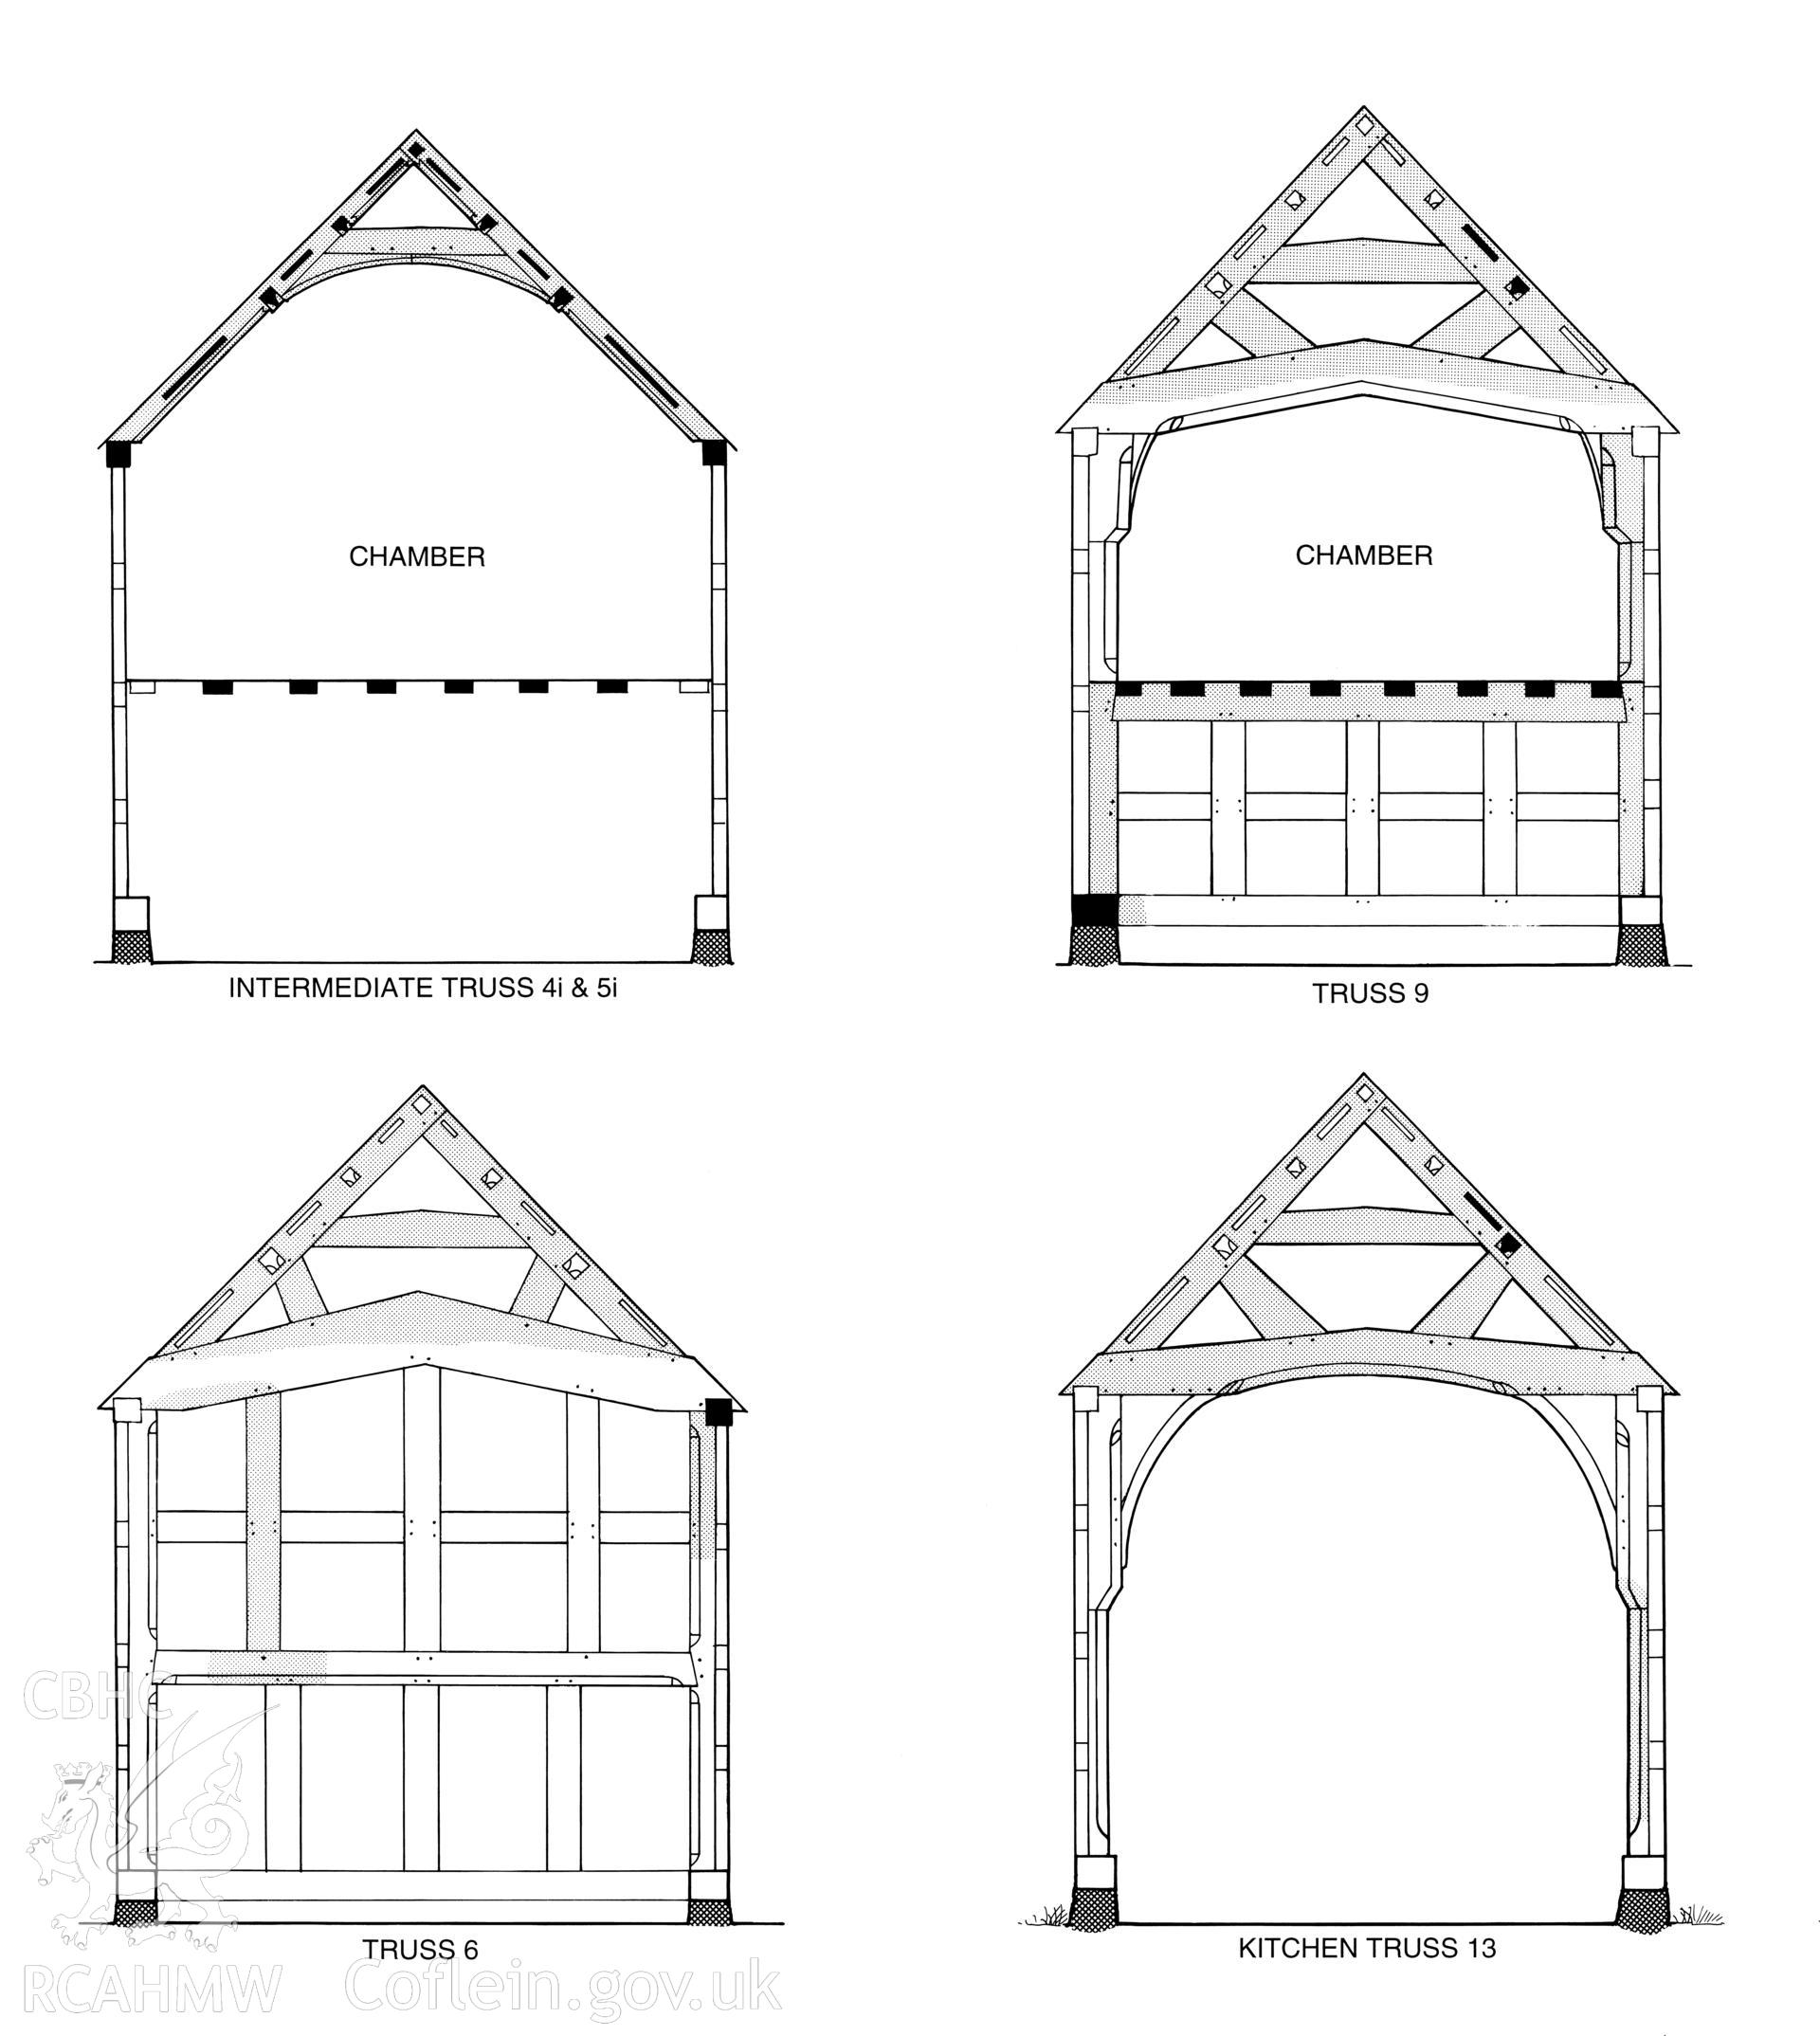 Measured drawings showing detail  of the trusses at Bryndraenog, Bugeildy , as published in the RCAHMW volume, Houses and History in the Marches of Wales. Radnorshire 1400-1800,  page 52, figure 44.